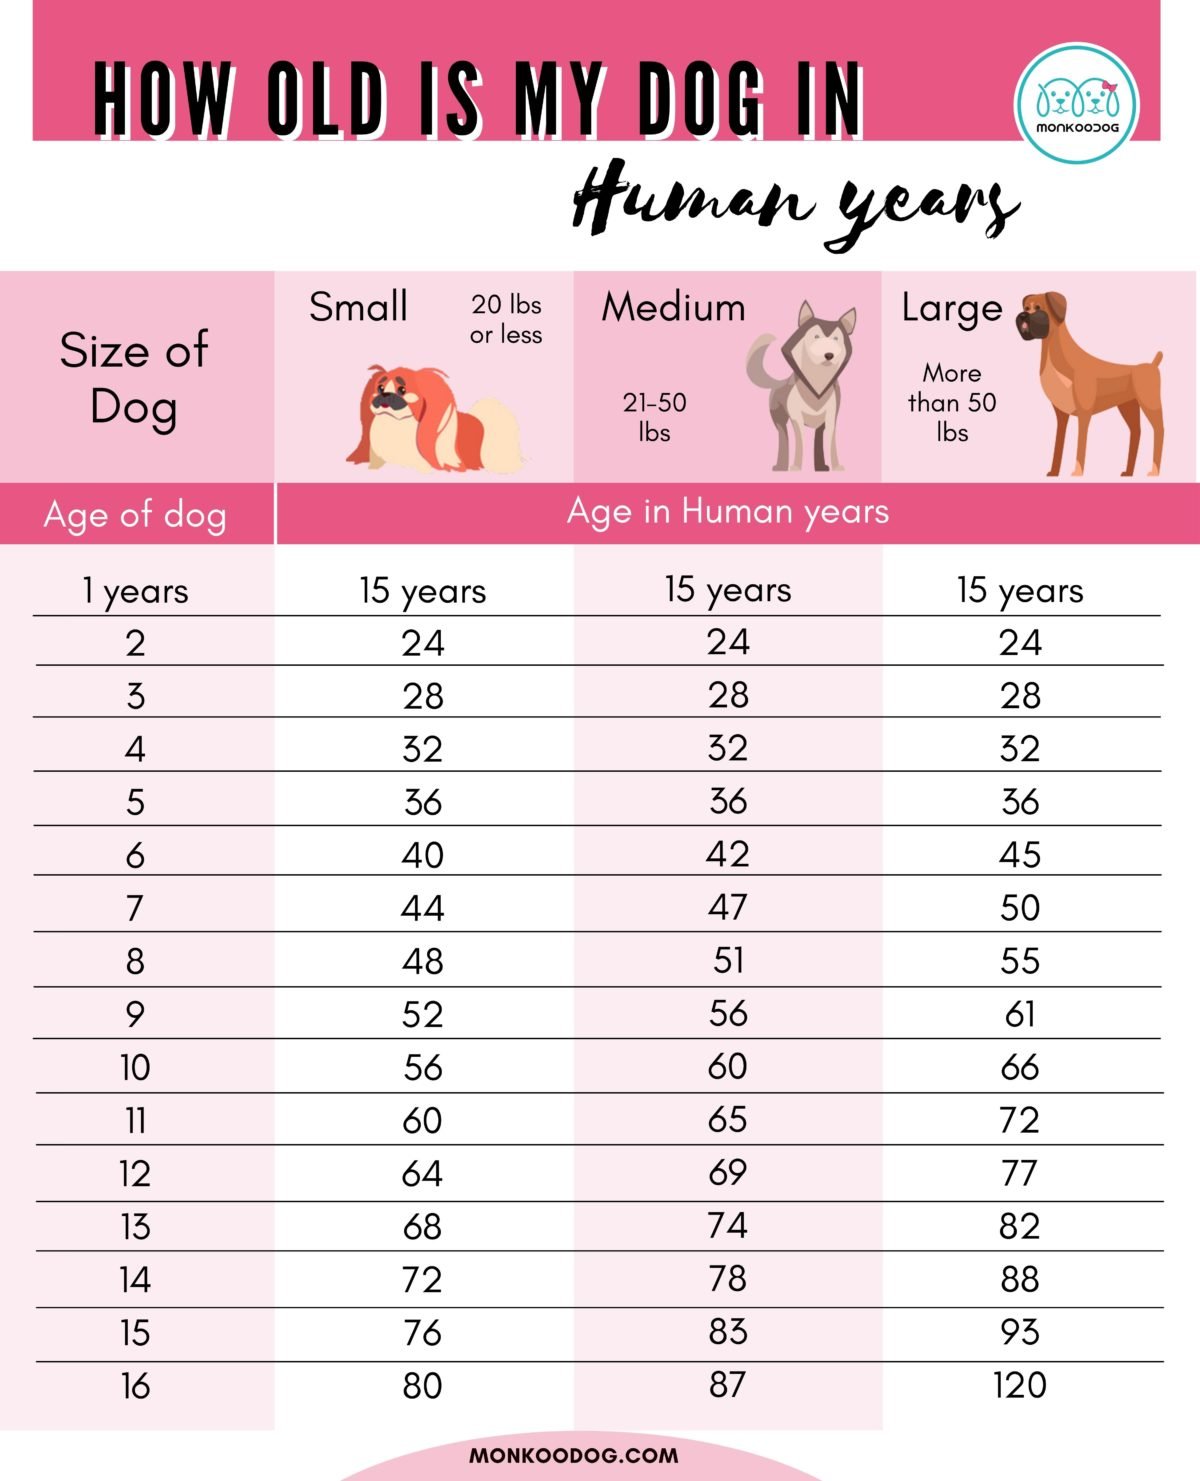 Dog Age Calculator: How old is my dog in human years - Monkoodog